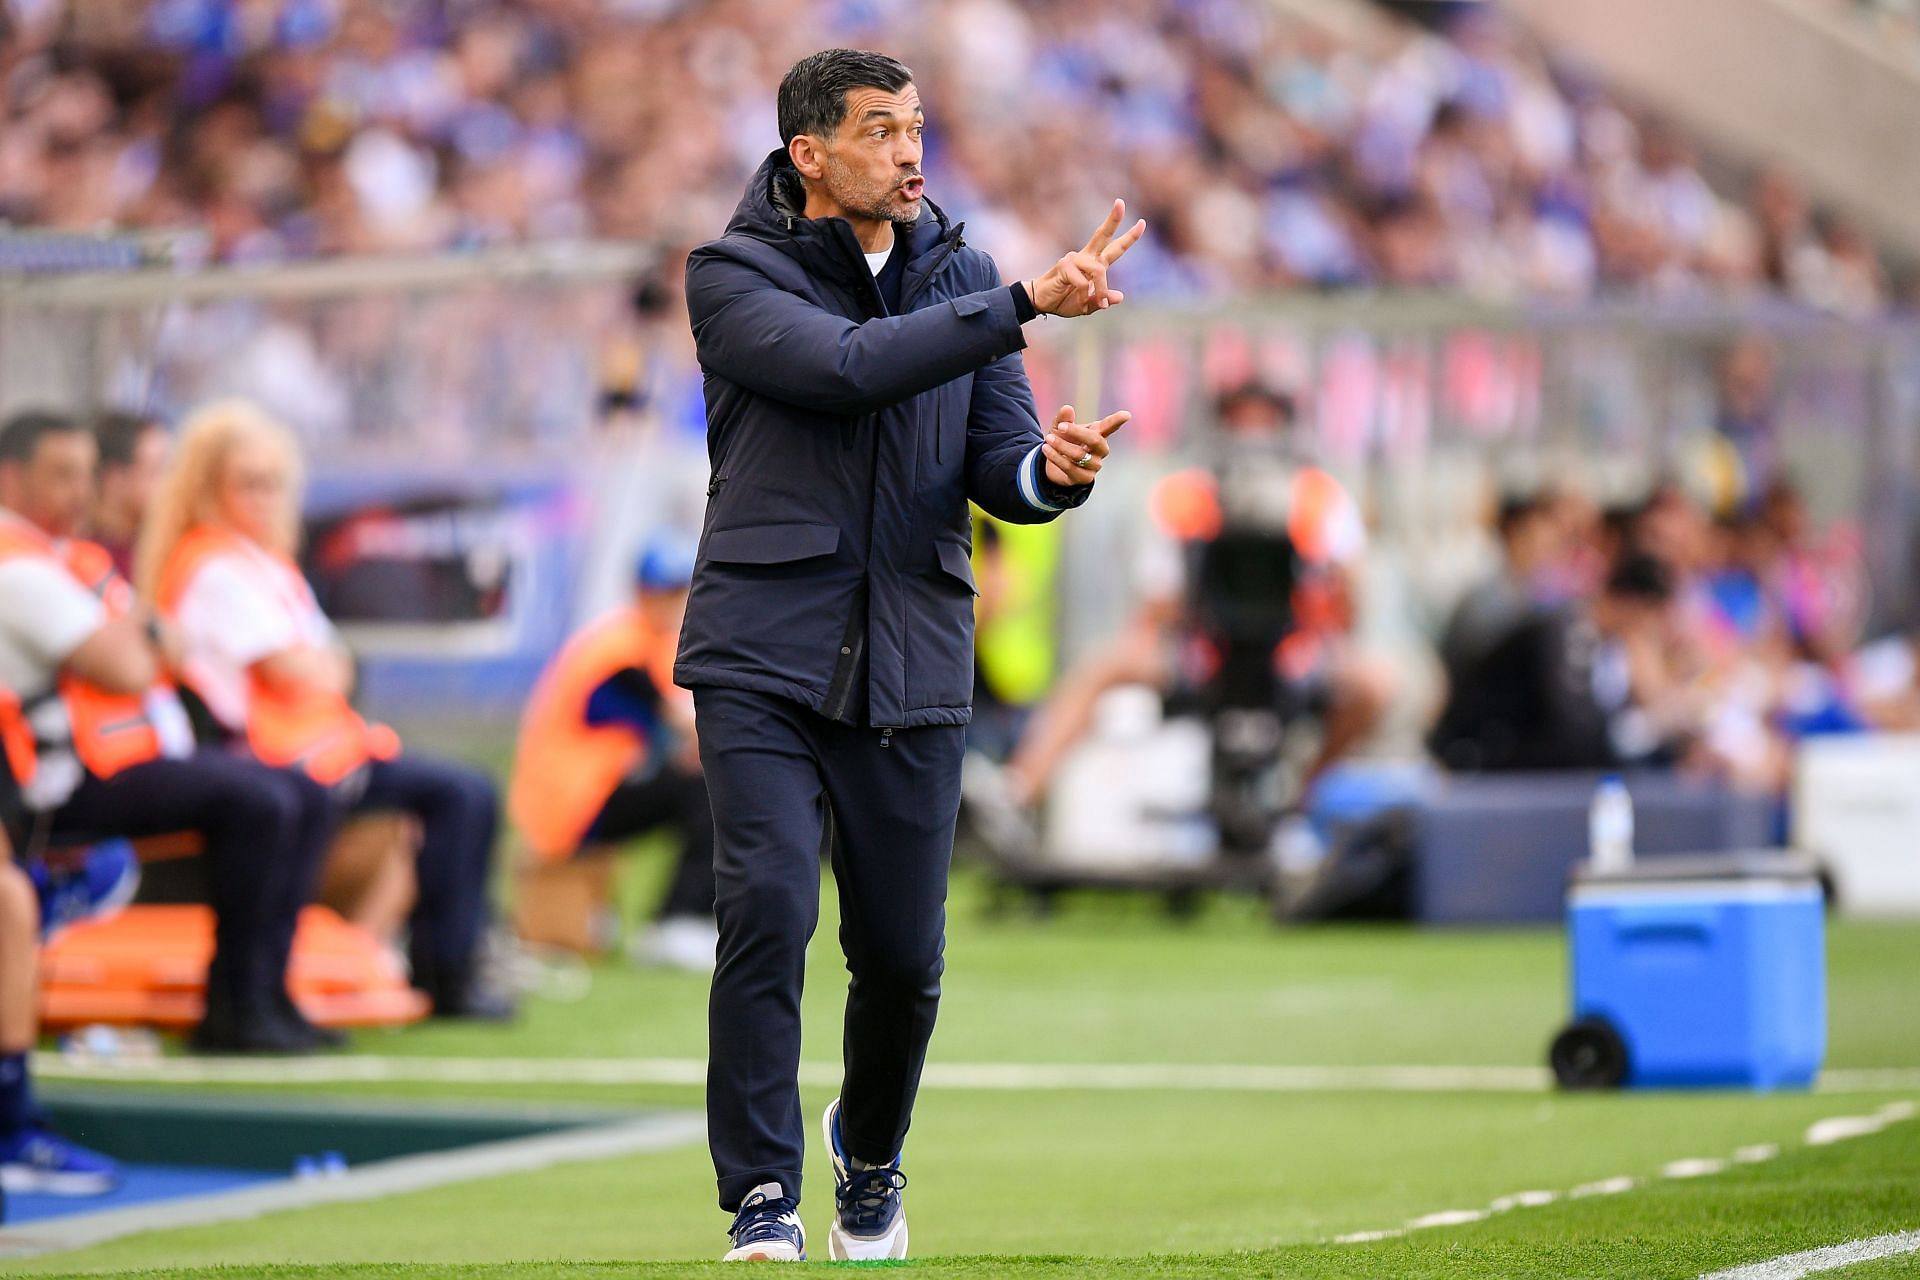 Sergio Conceicao has guided FC Porto to three league titles.